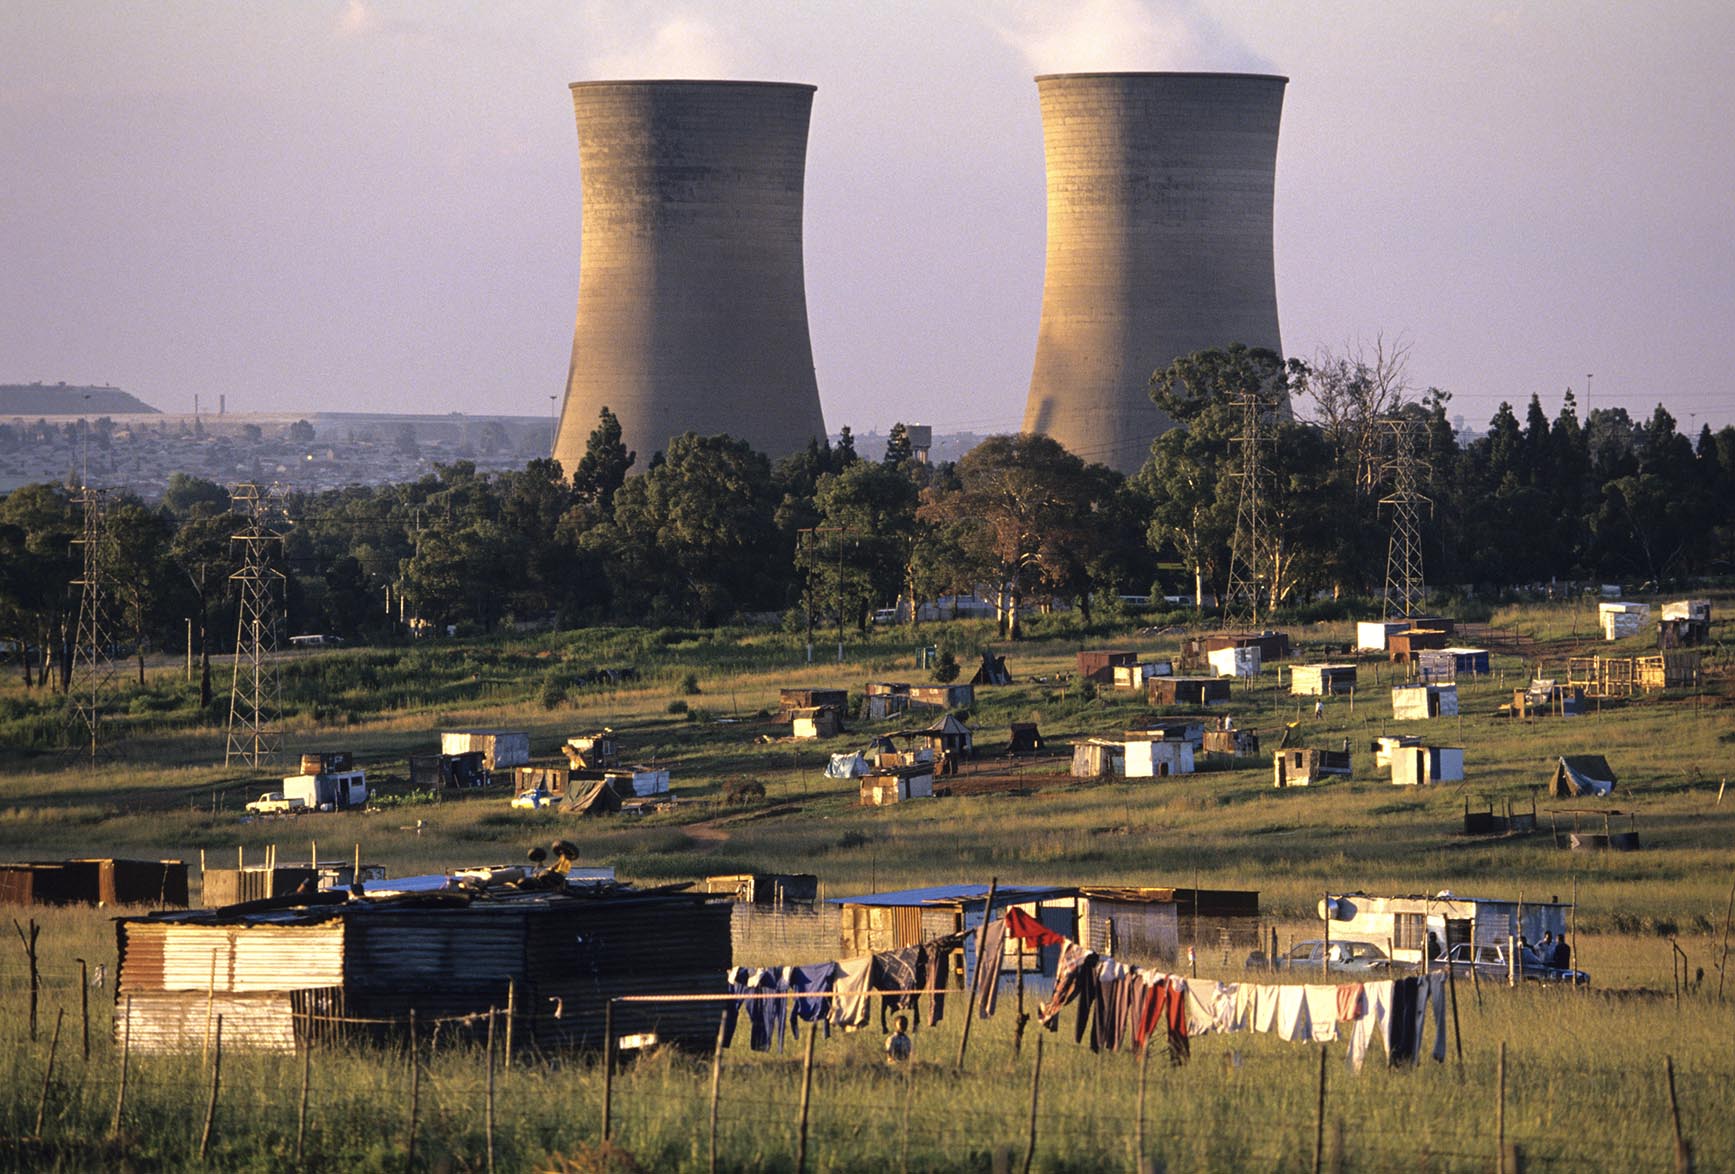 A nuclear power plant looms behind shanty homes in Soweto,  an urban area of the city of Johannesburg, South Africa.  Its origins are as a very poor and impoverished black township under South Africa's Apartheid government. The population has historically been overwhelmingly black and some of the watershed events in the struggle against Apartheid occurred in the township.